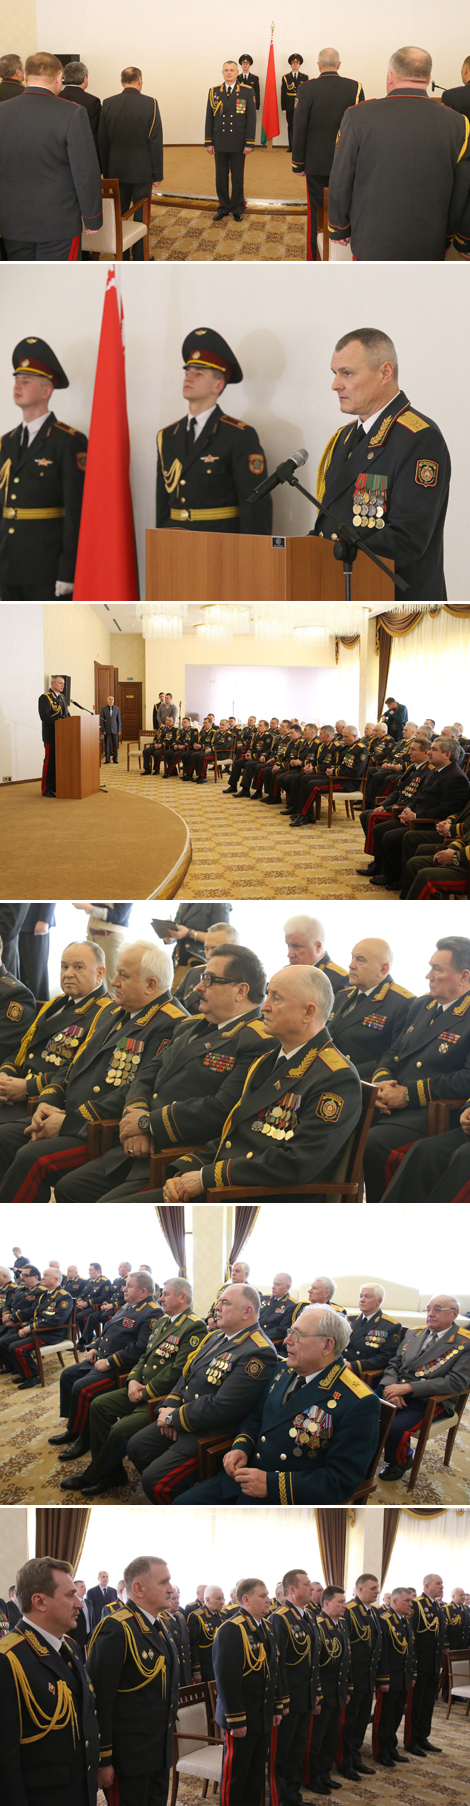 Meeting of the officers of the Interior Ministry and the interior troops